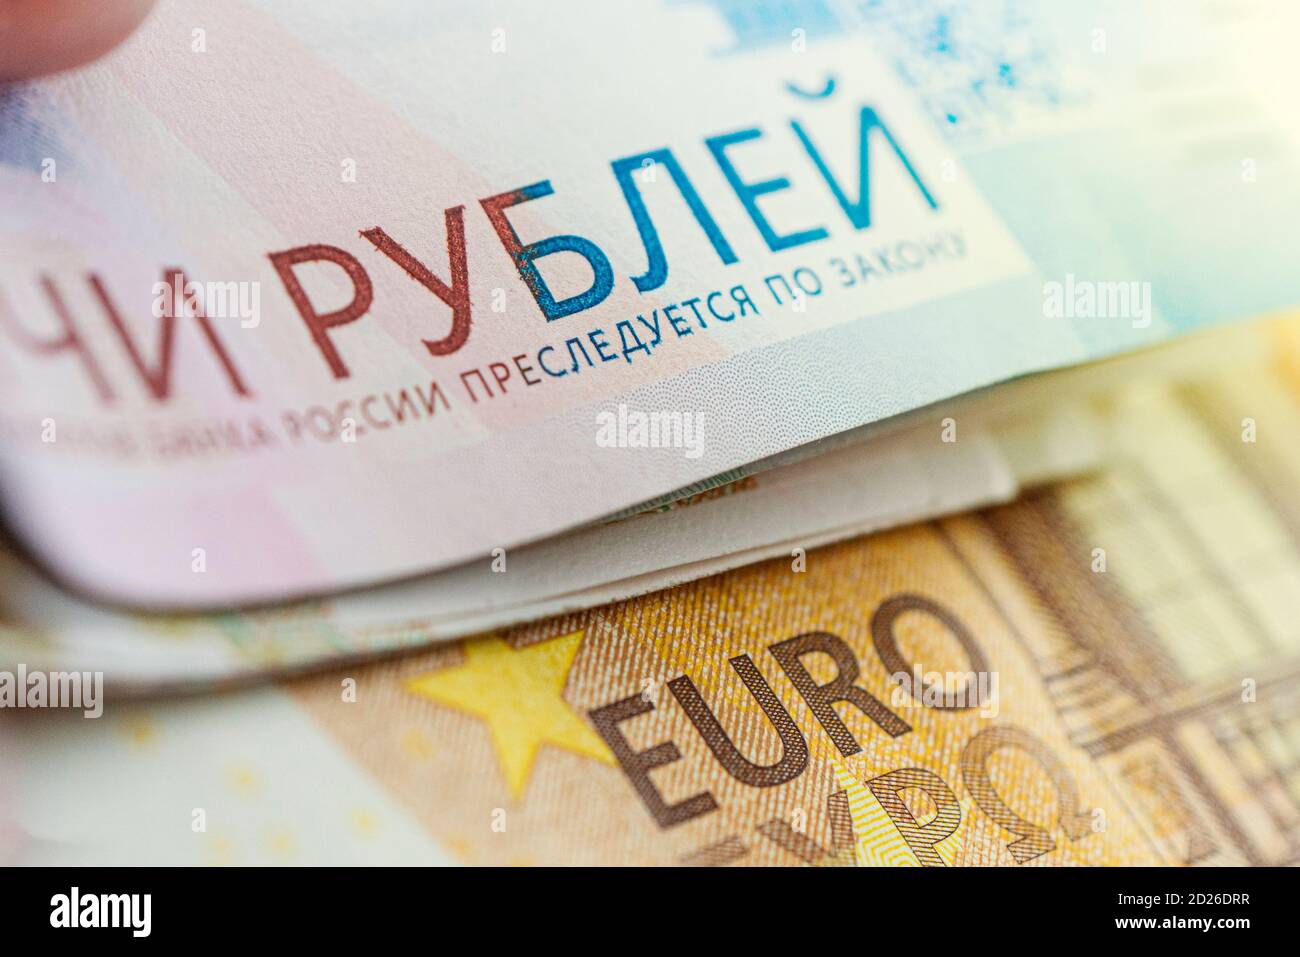 exchange of euros for rubles. currency devaluation. Banknotes close-up. The concept of the financial crisis. Stock Photo